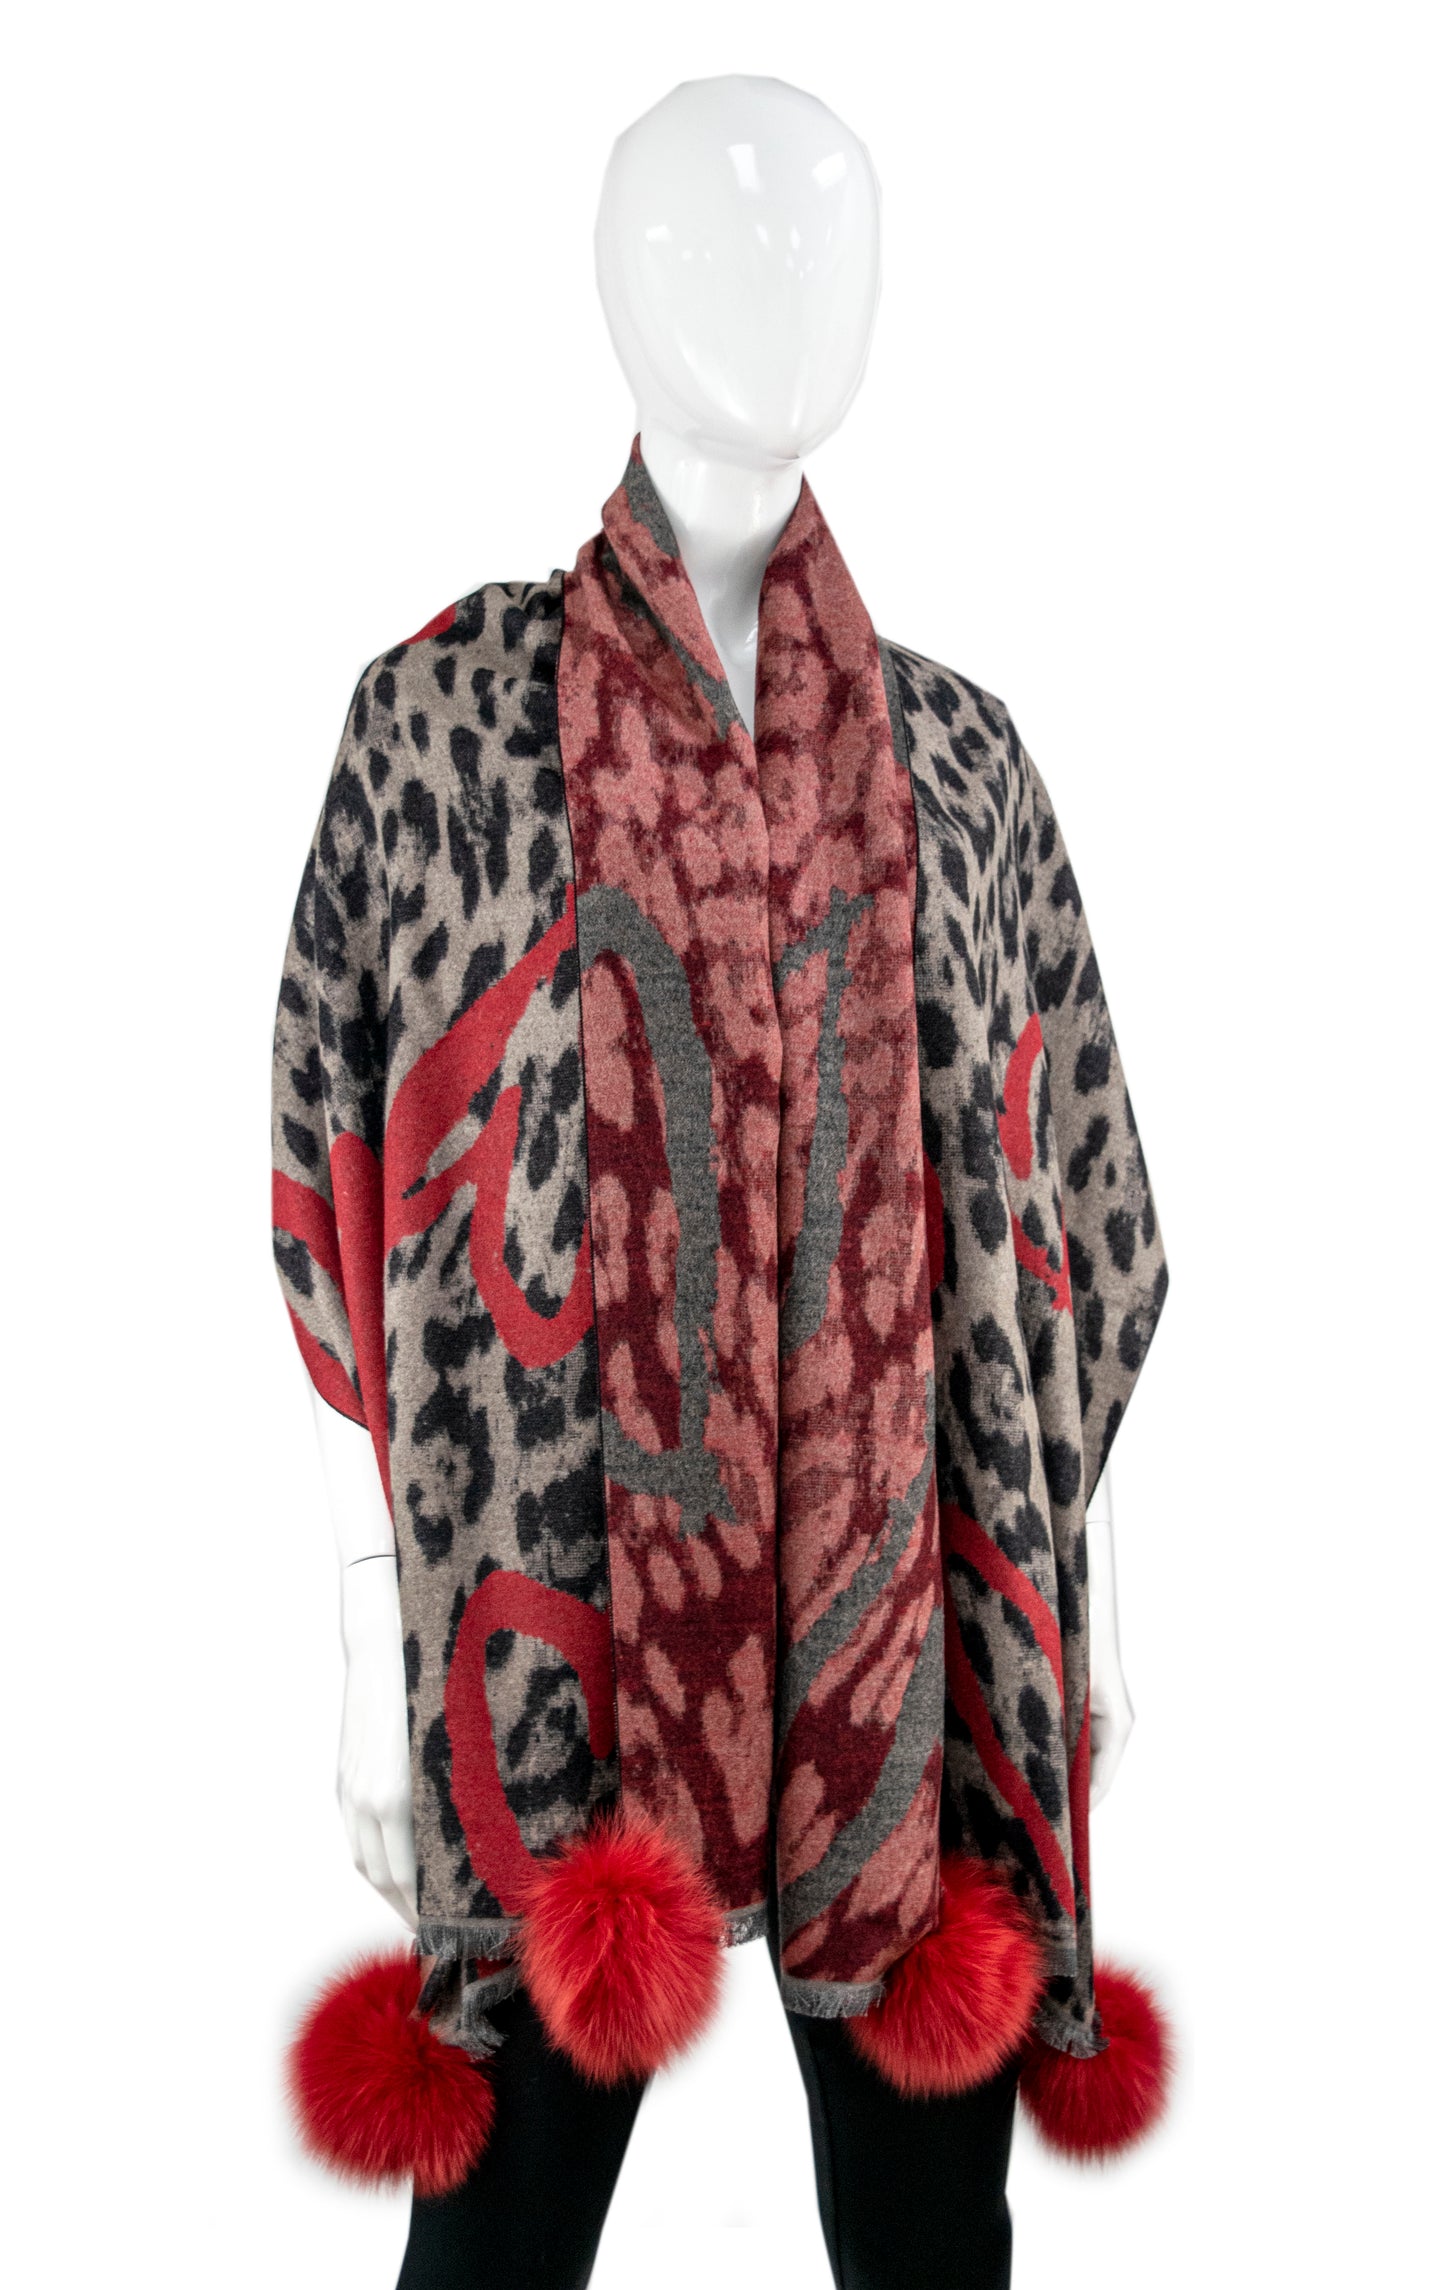 Mitchie's Woven Animal Print Heart Scarf